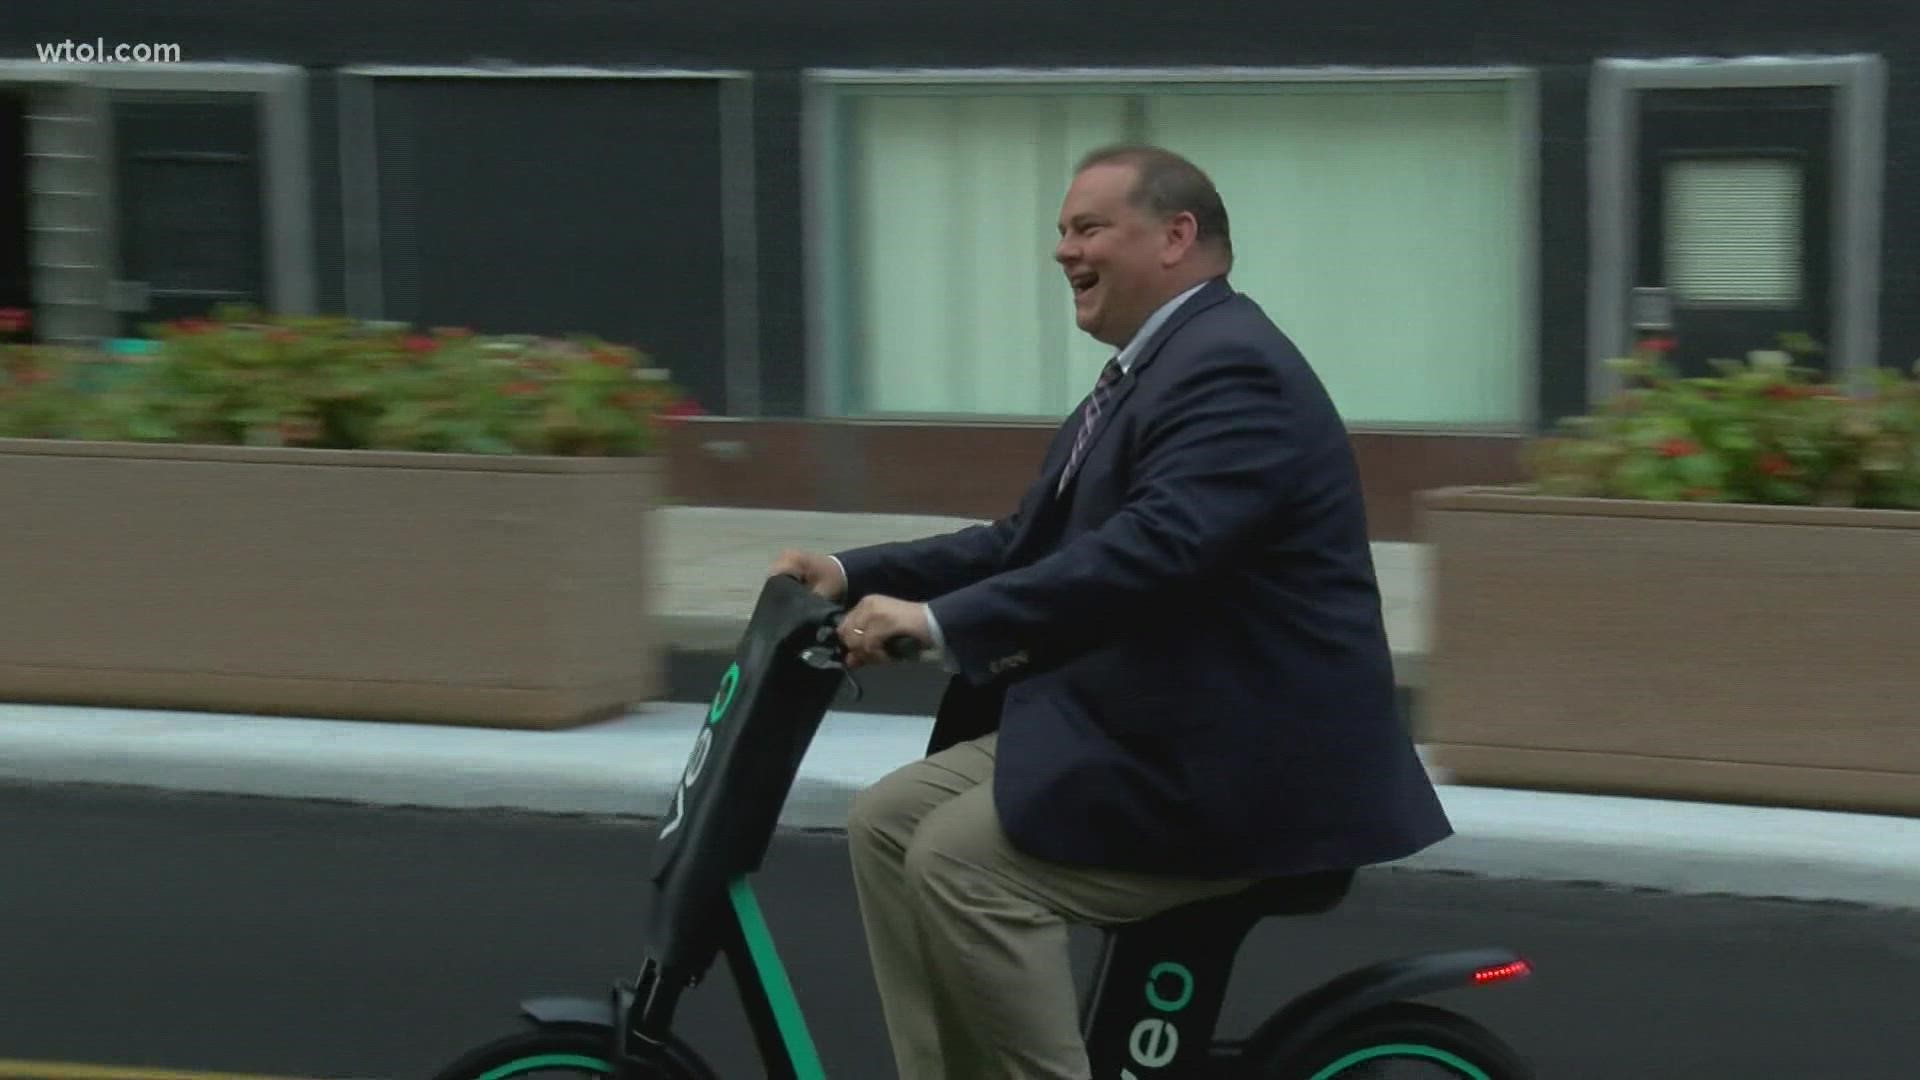 The program gives residents and visitors access to new e-scooters and bicycles to cruise around Toledo. Mayor Wade Kapszukiewicz was among the first to take a spin.